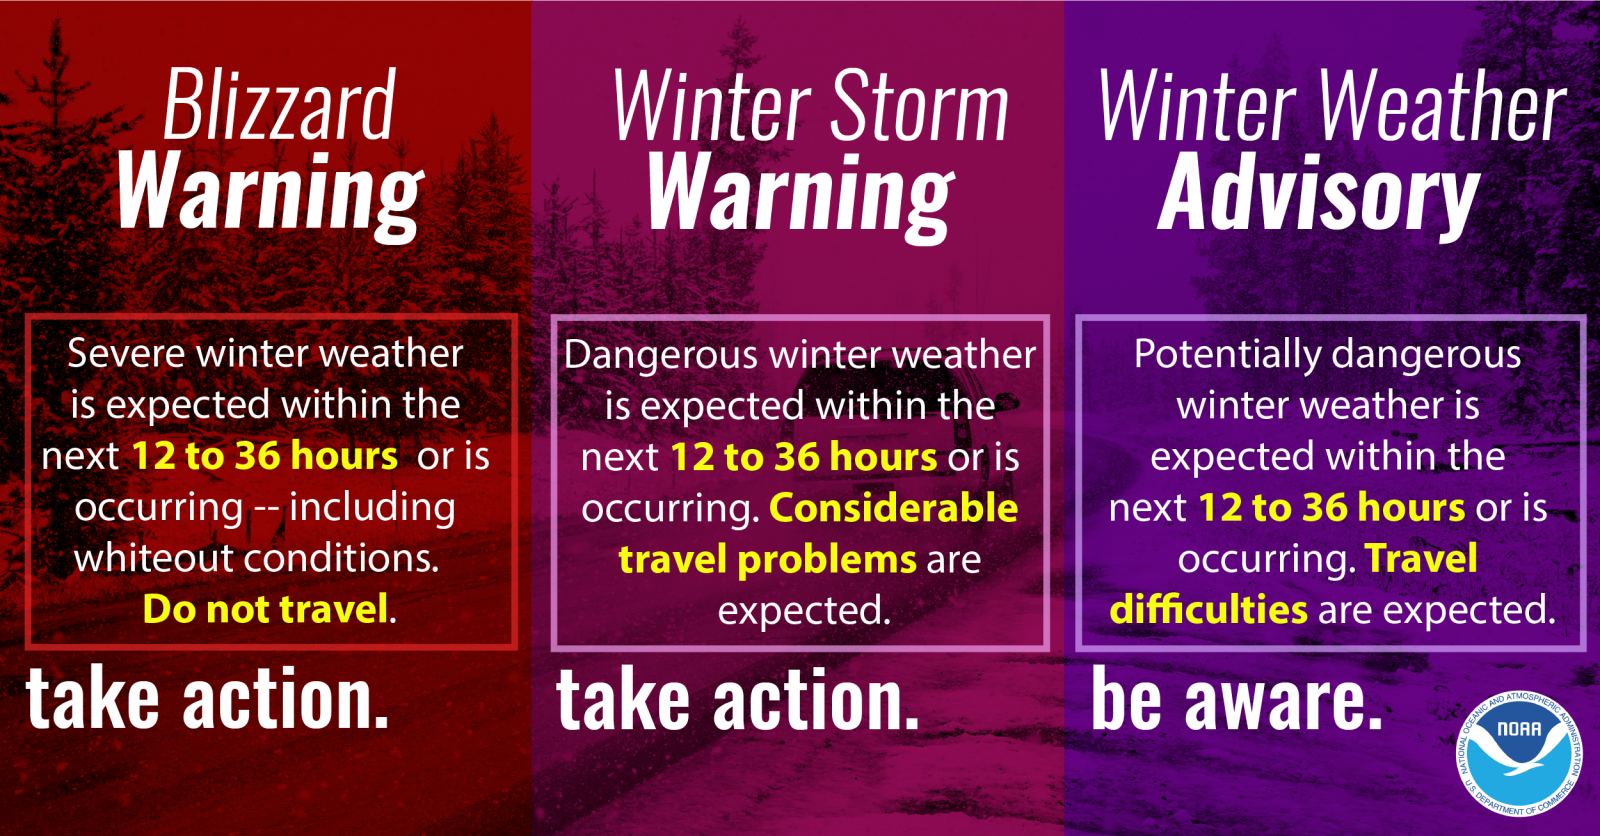 Differences with Watches, Warnings and Advisories